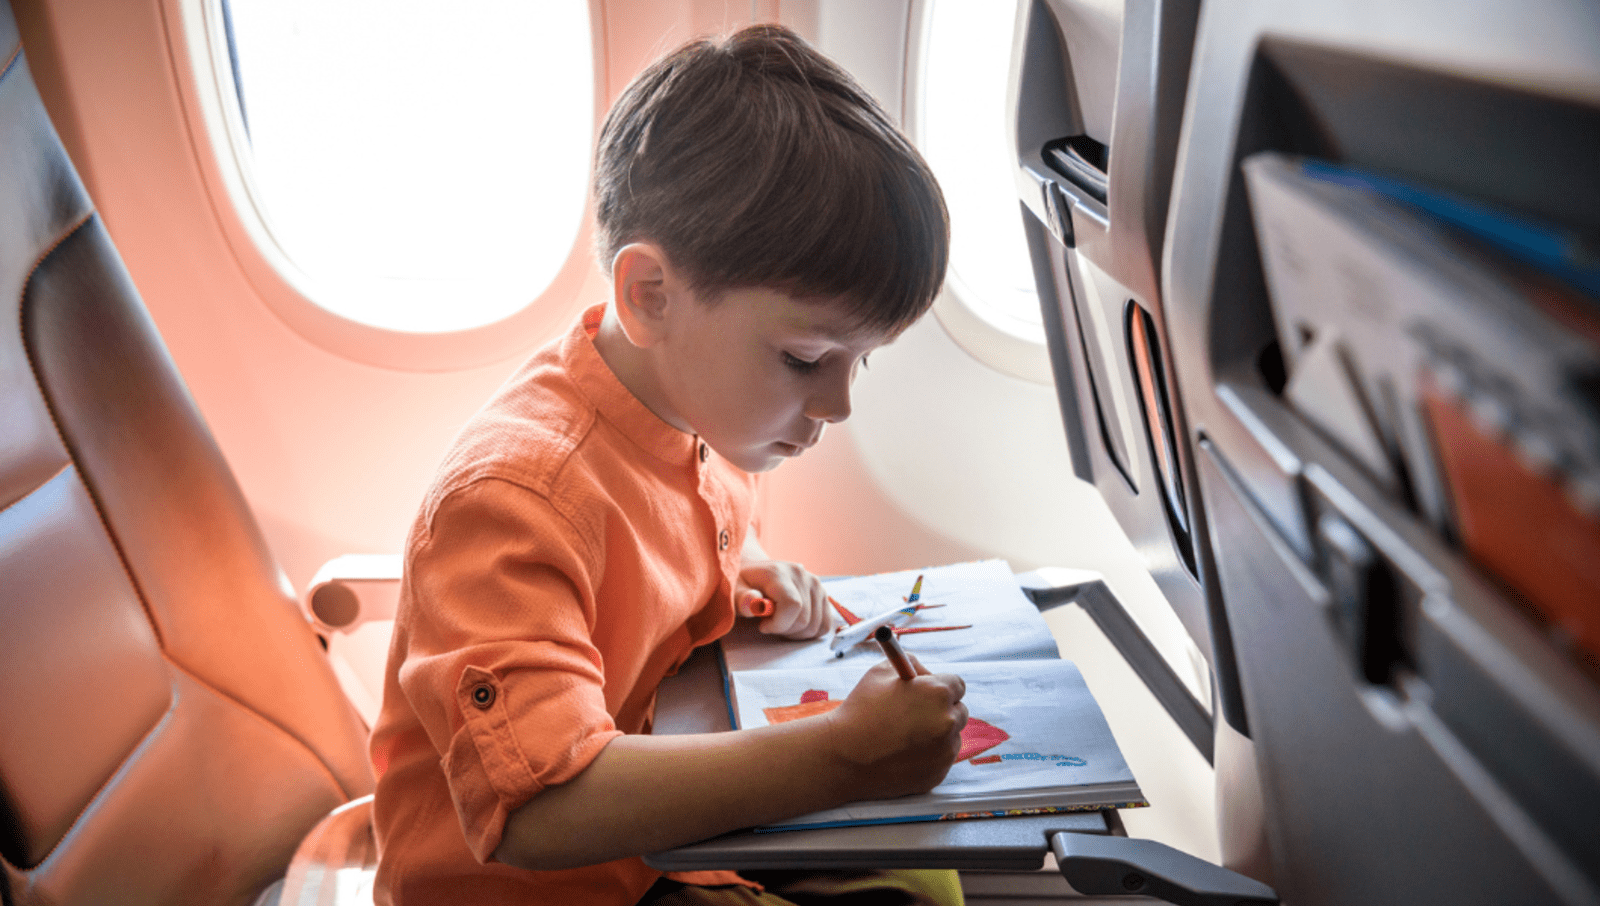 Child in orange shirt drawing with crayons on pen with toy airplane sitting on drawing book 